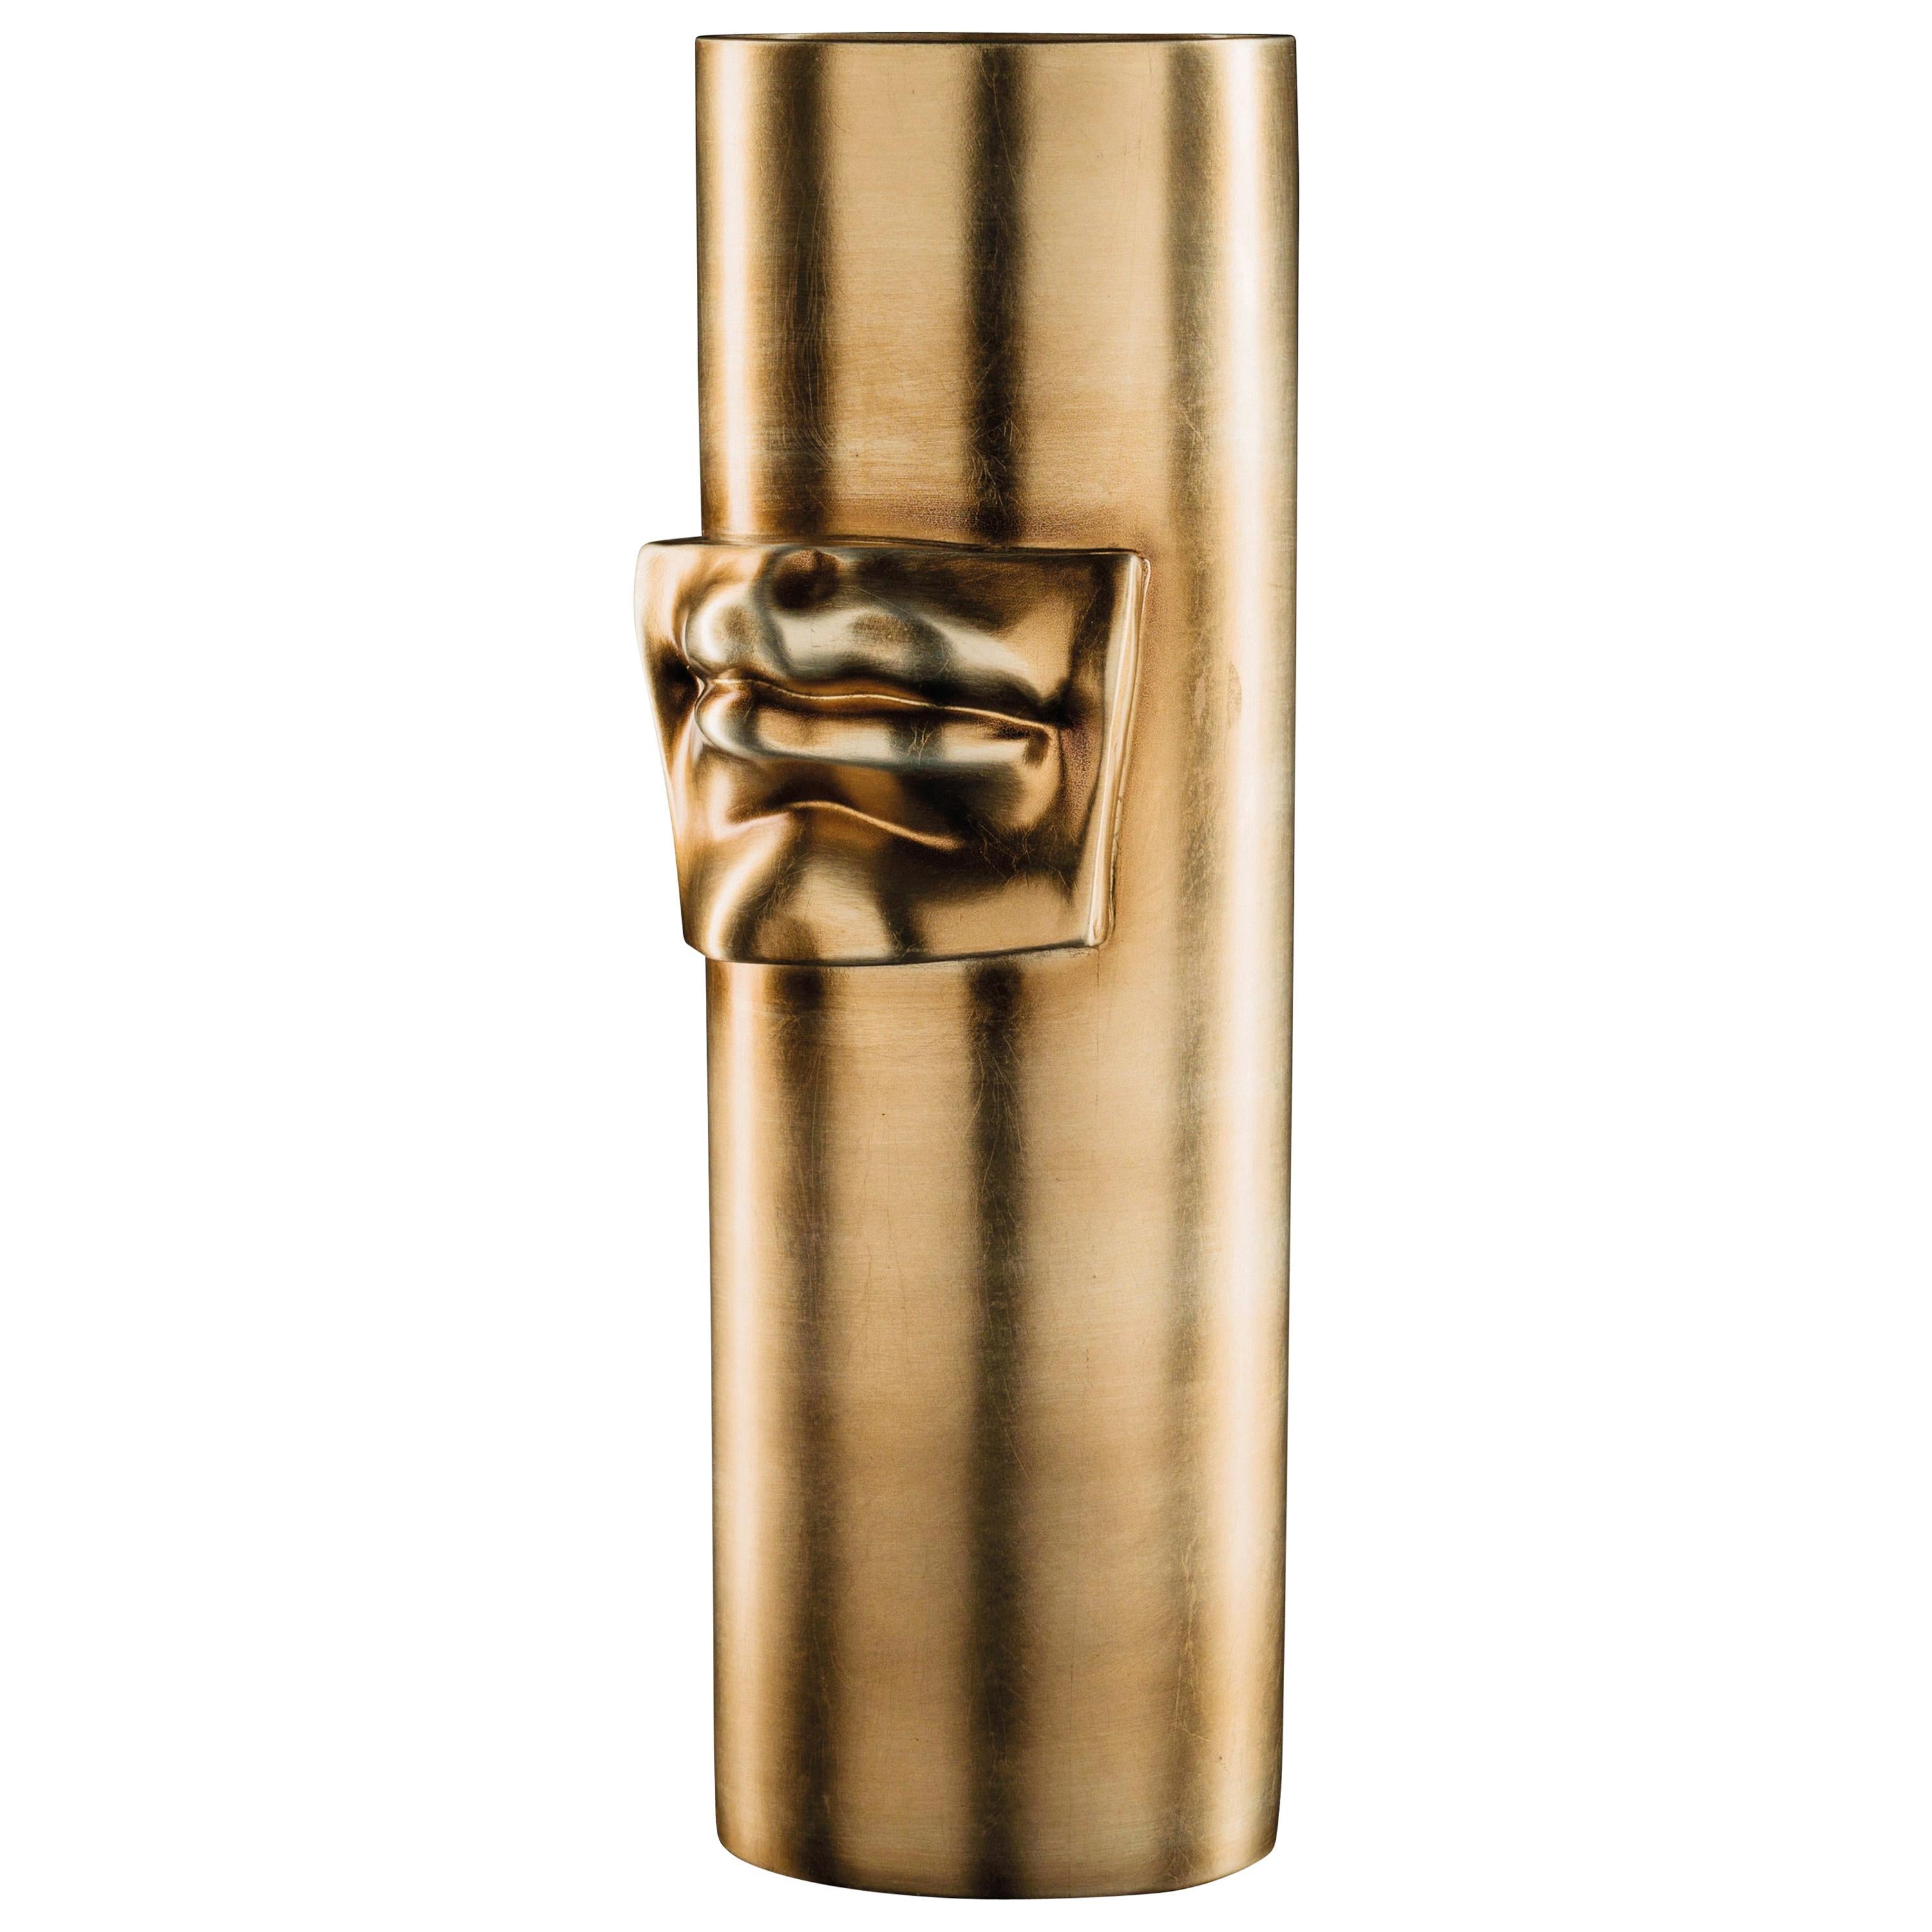 Vase 'David by Michelangelo' Mouth, Brass Metal Finish, in Ceramic, Italy